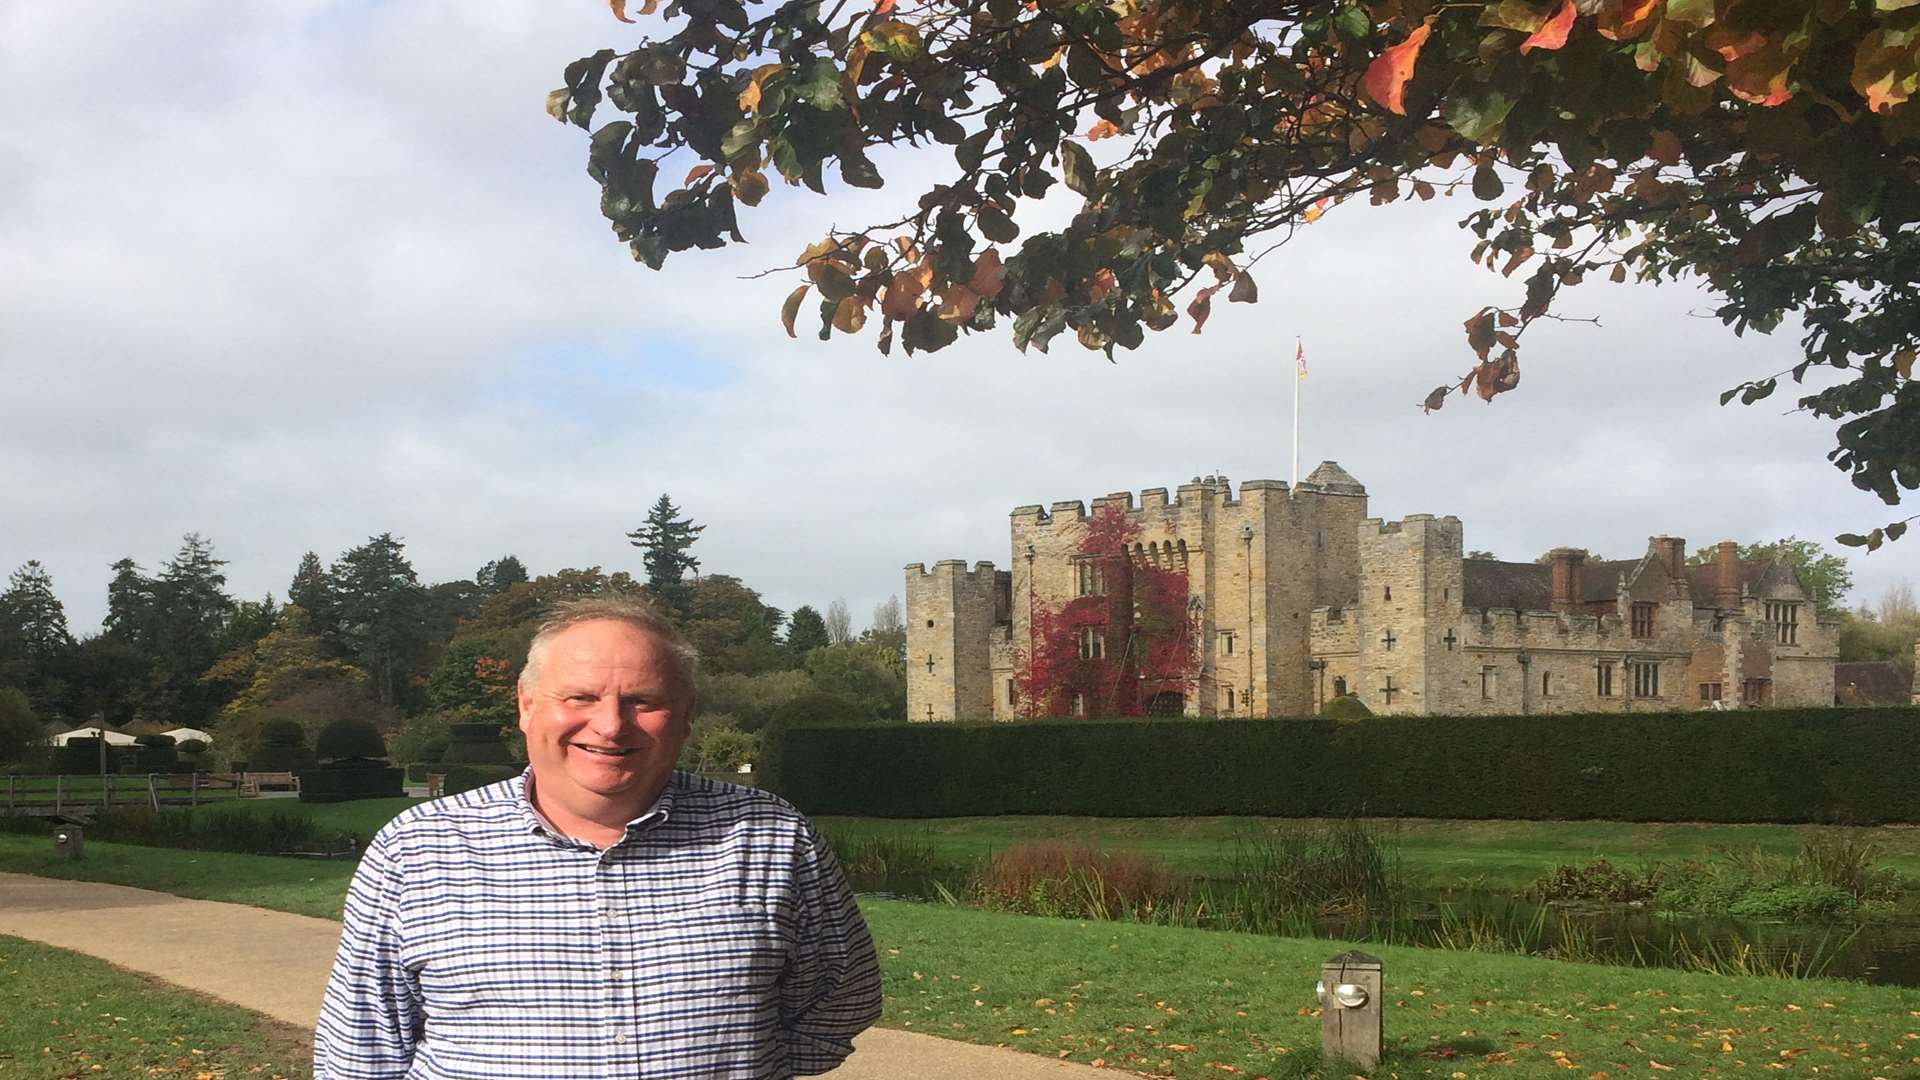 Neil in front of the castle that's covered in Boston ivy